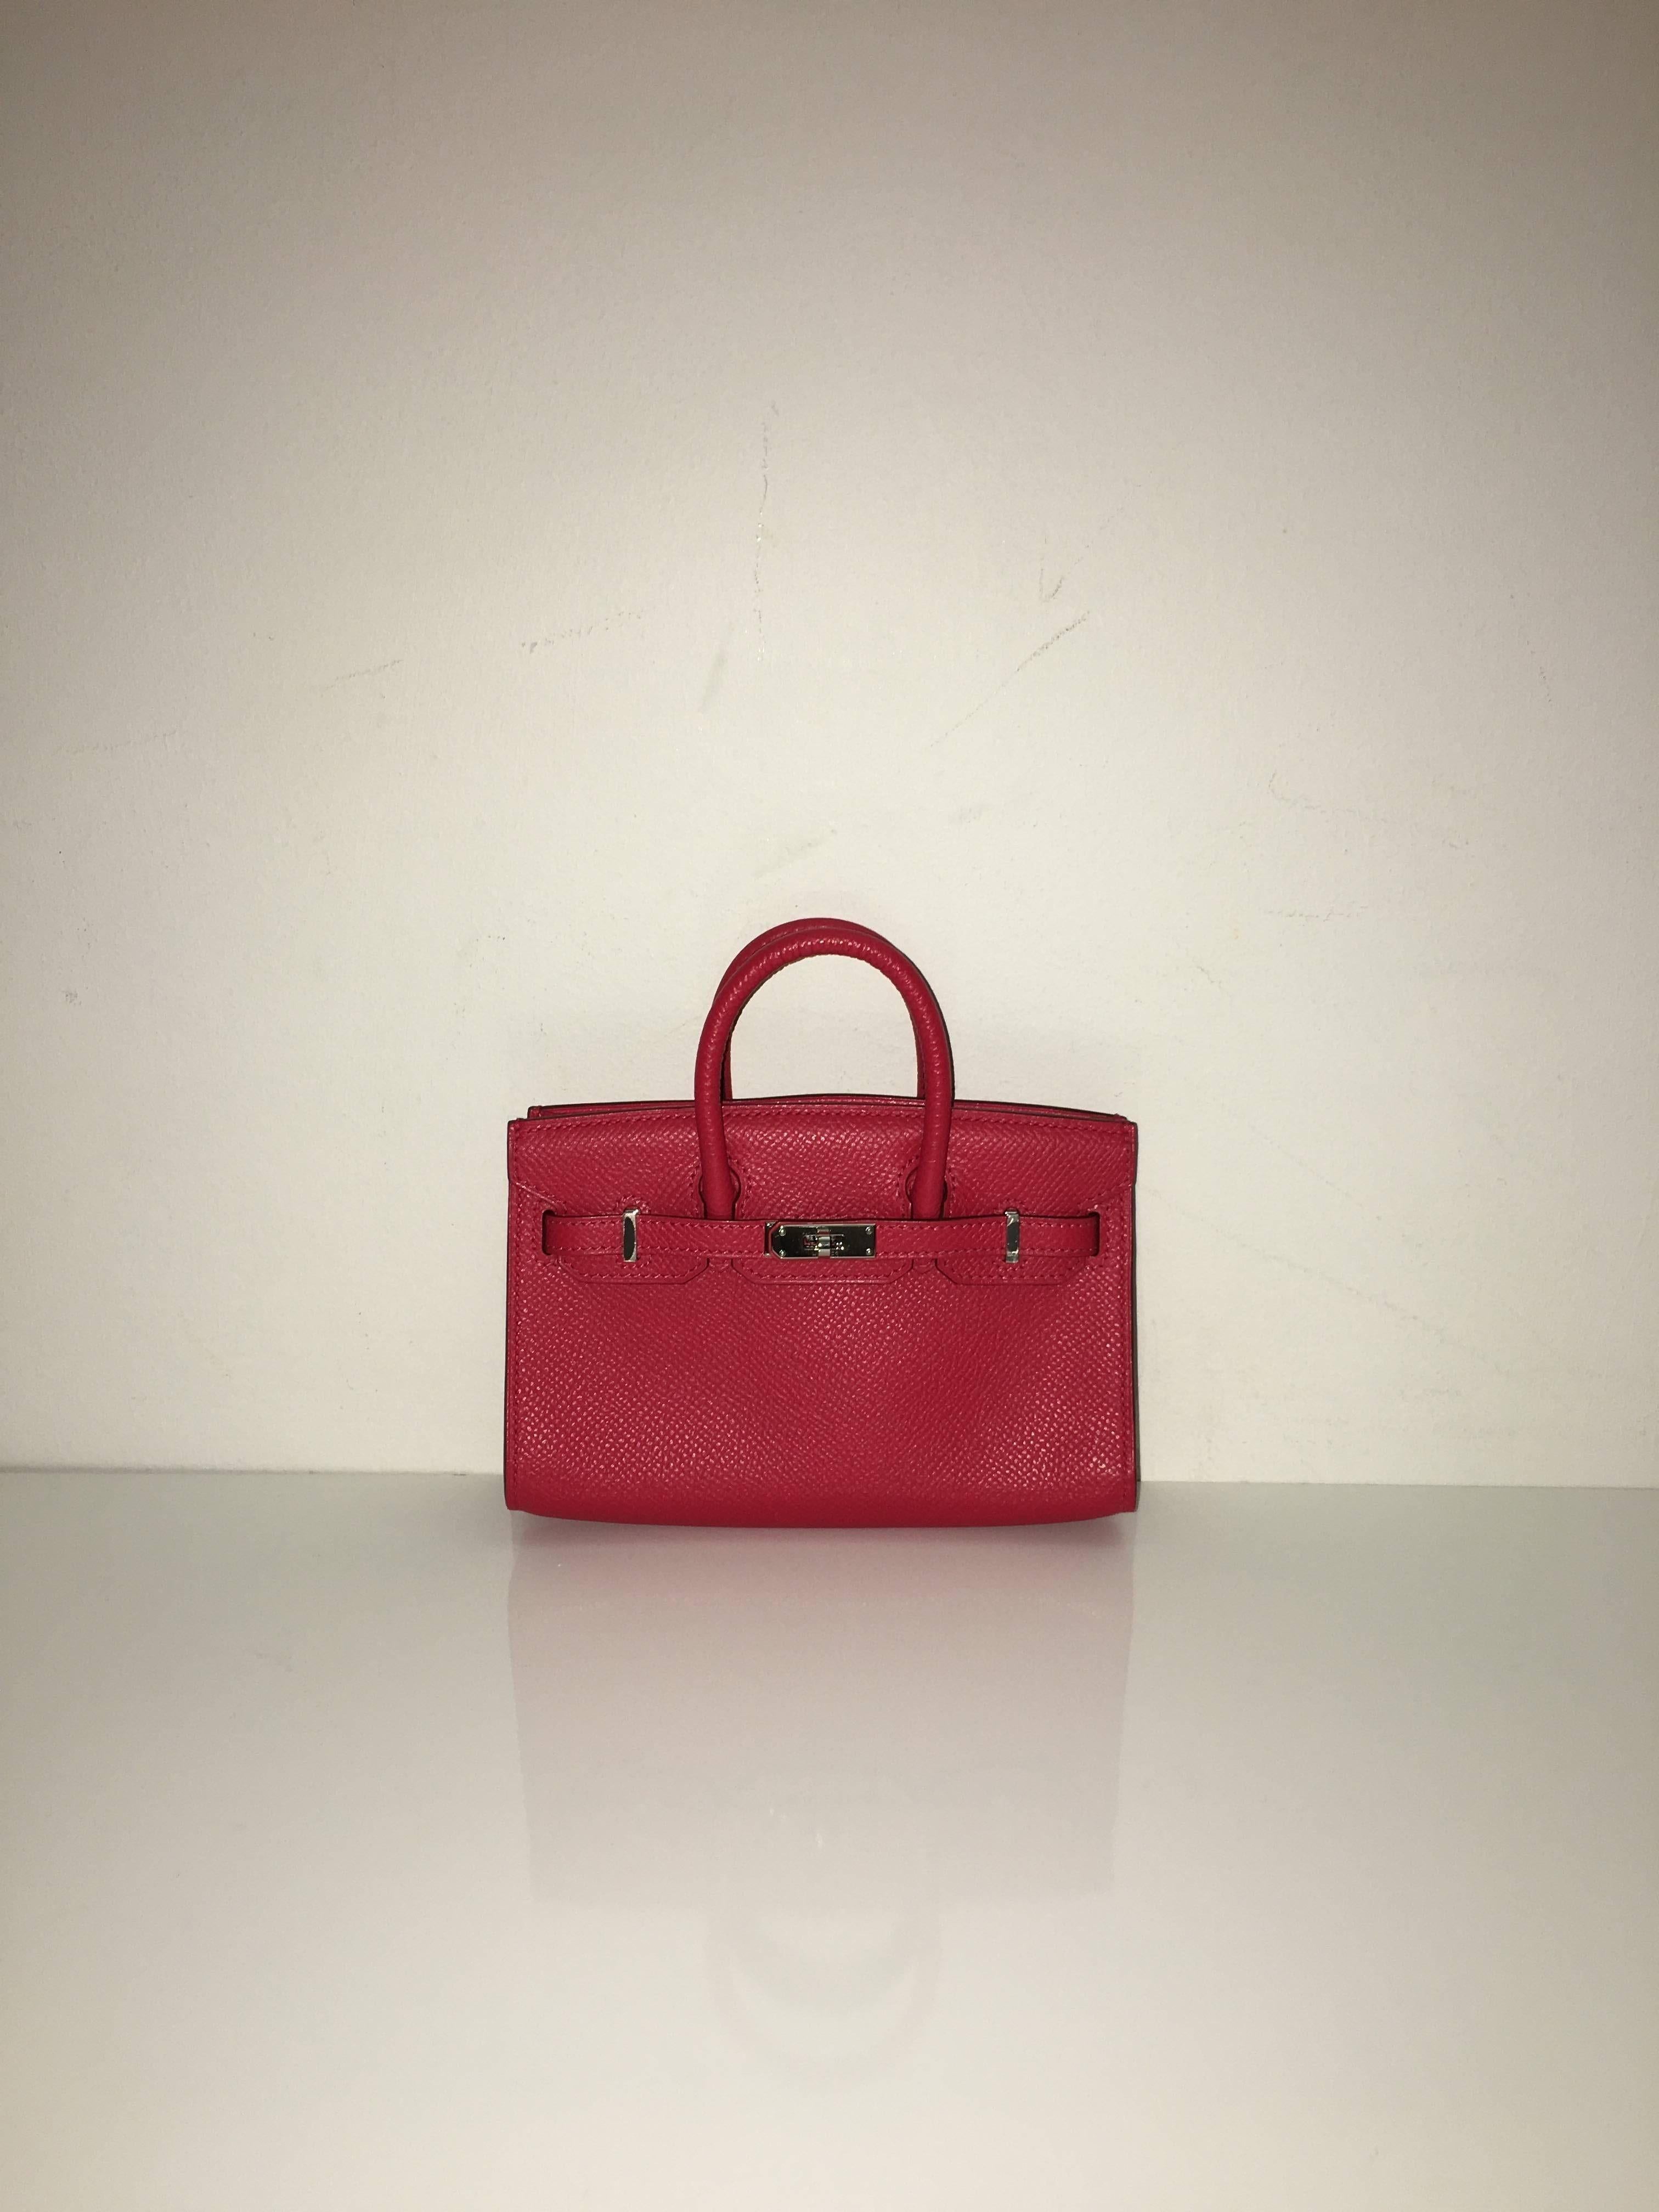 Hermes 
Tiny Birkin
Epsom Leather 
Colour Bouga Invillier
Silver (Palladium) Hardware 
store fresh, comes with receipt and full set (dust bag, box...) 
Hydeparkfashion specializes in sourcing and delivering authentic luxury handbags, mainly